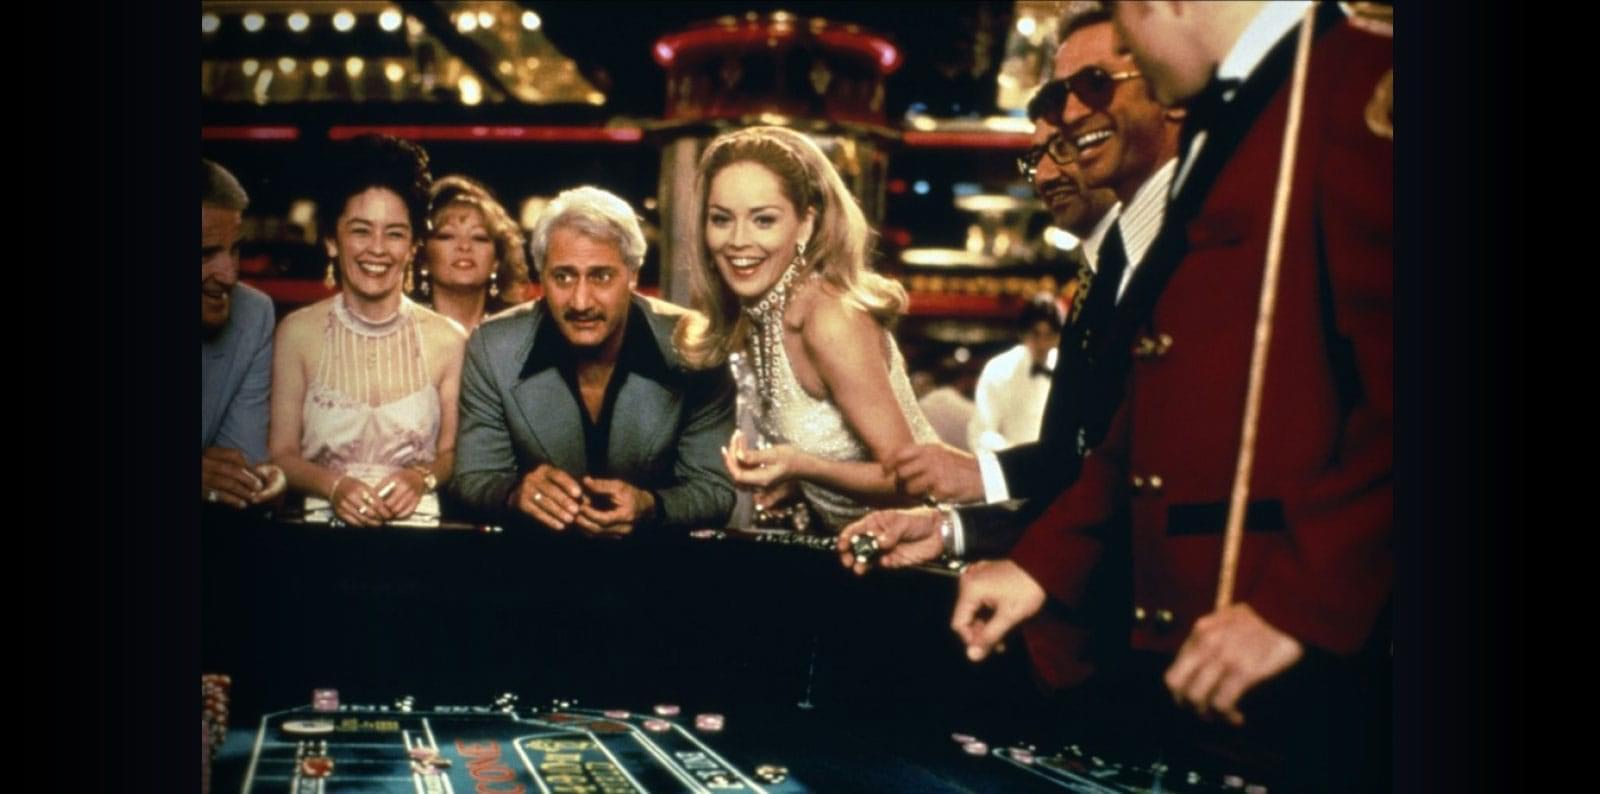 Ready for some classic casino movie excitement? Movies are all about escapism and these all-time top casino classics are all worth watching and rewatching.